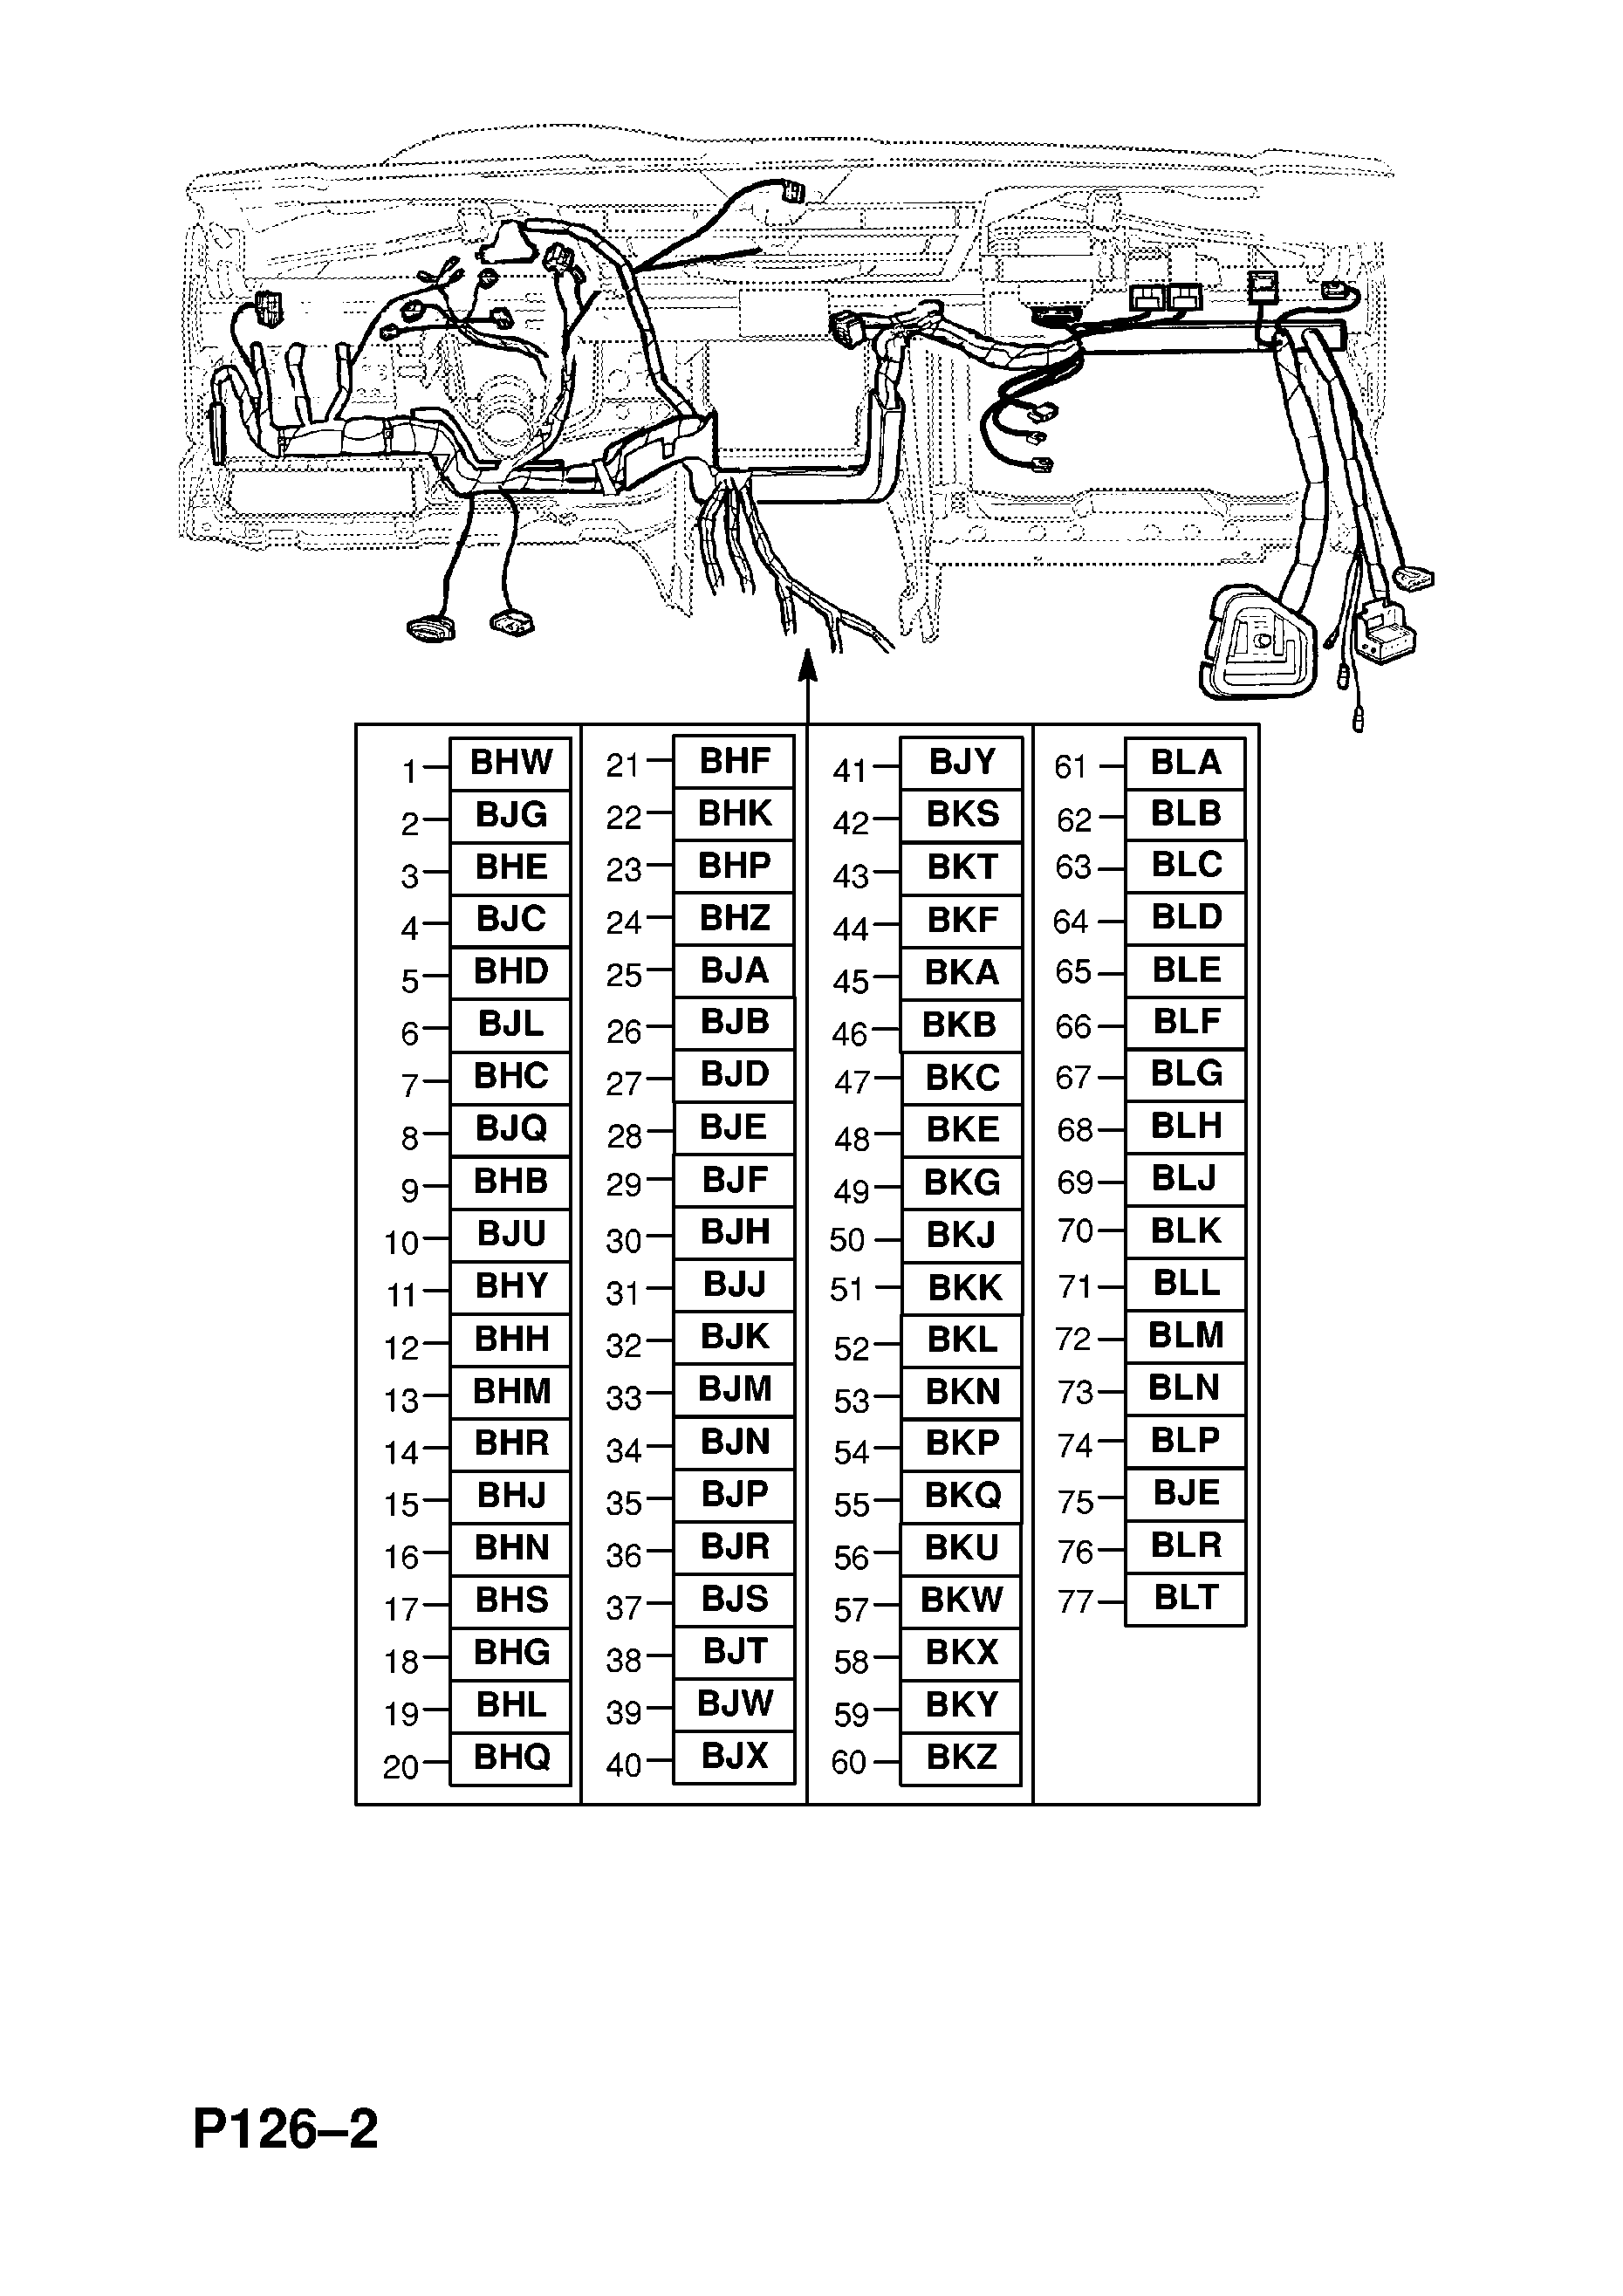 INSTRUMENT PANEL WIRING HARNESS (CONTD.) <small><i>[CONVERTIBLE (F67) (LHD) (3B000001-)]</i></small>